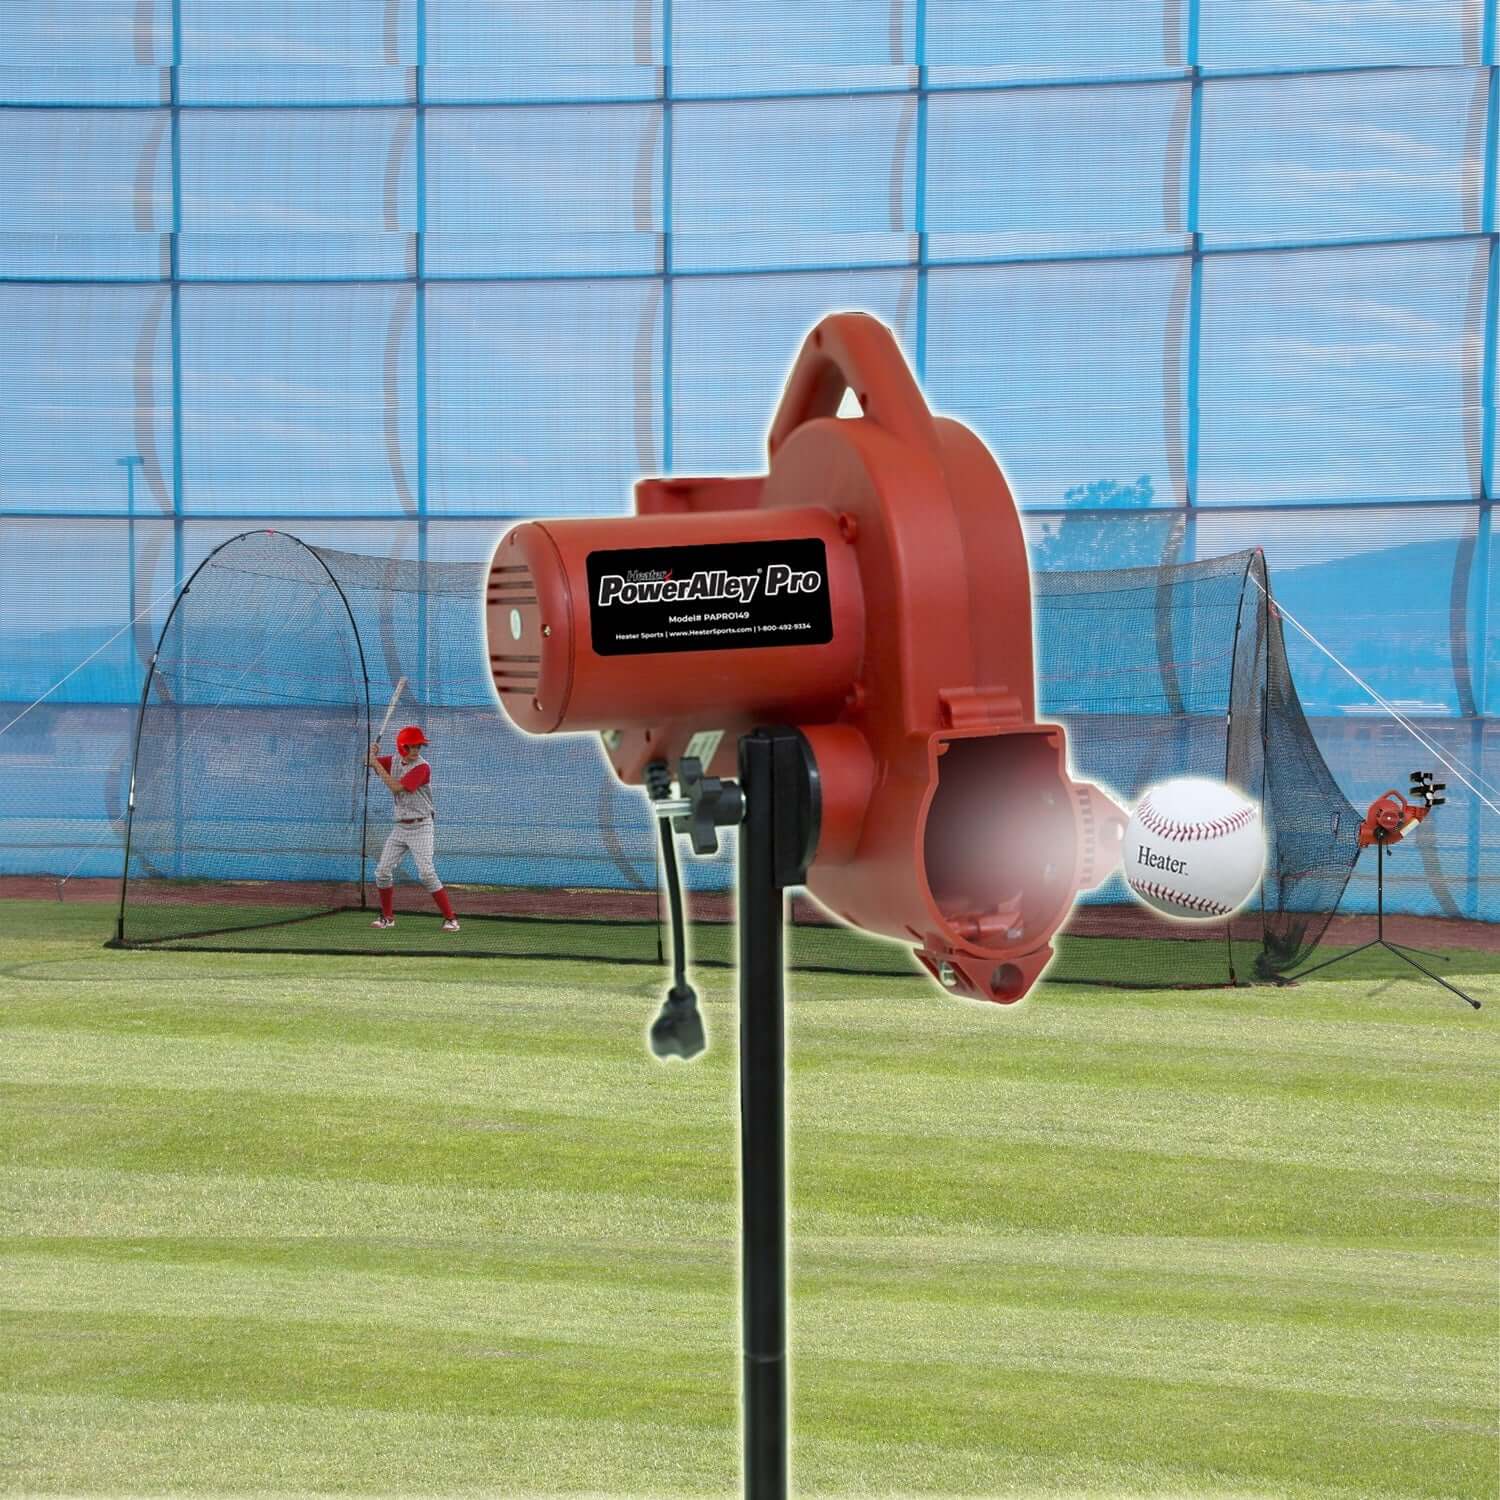 Real Ball 80 MPH Pitching Machine & 22'x 12'x8' Home Batting Cage Combo - Pitch Machine Pros